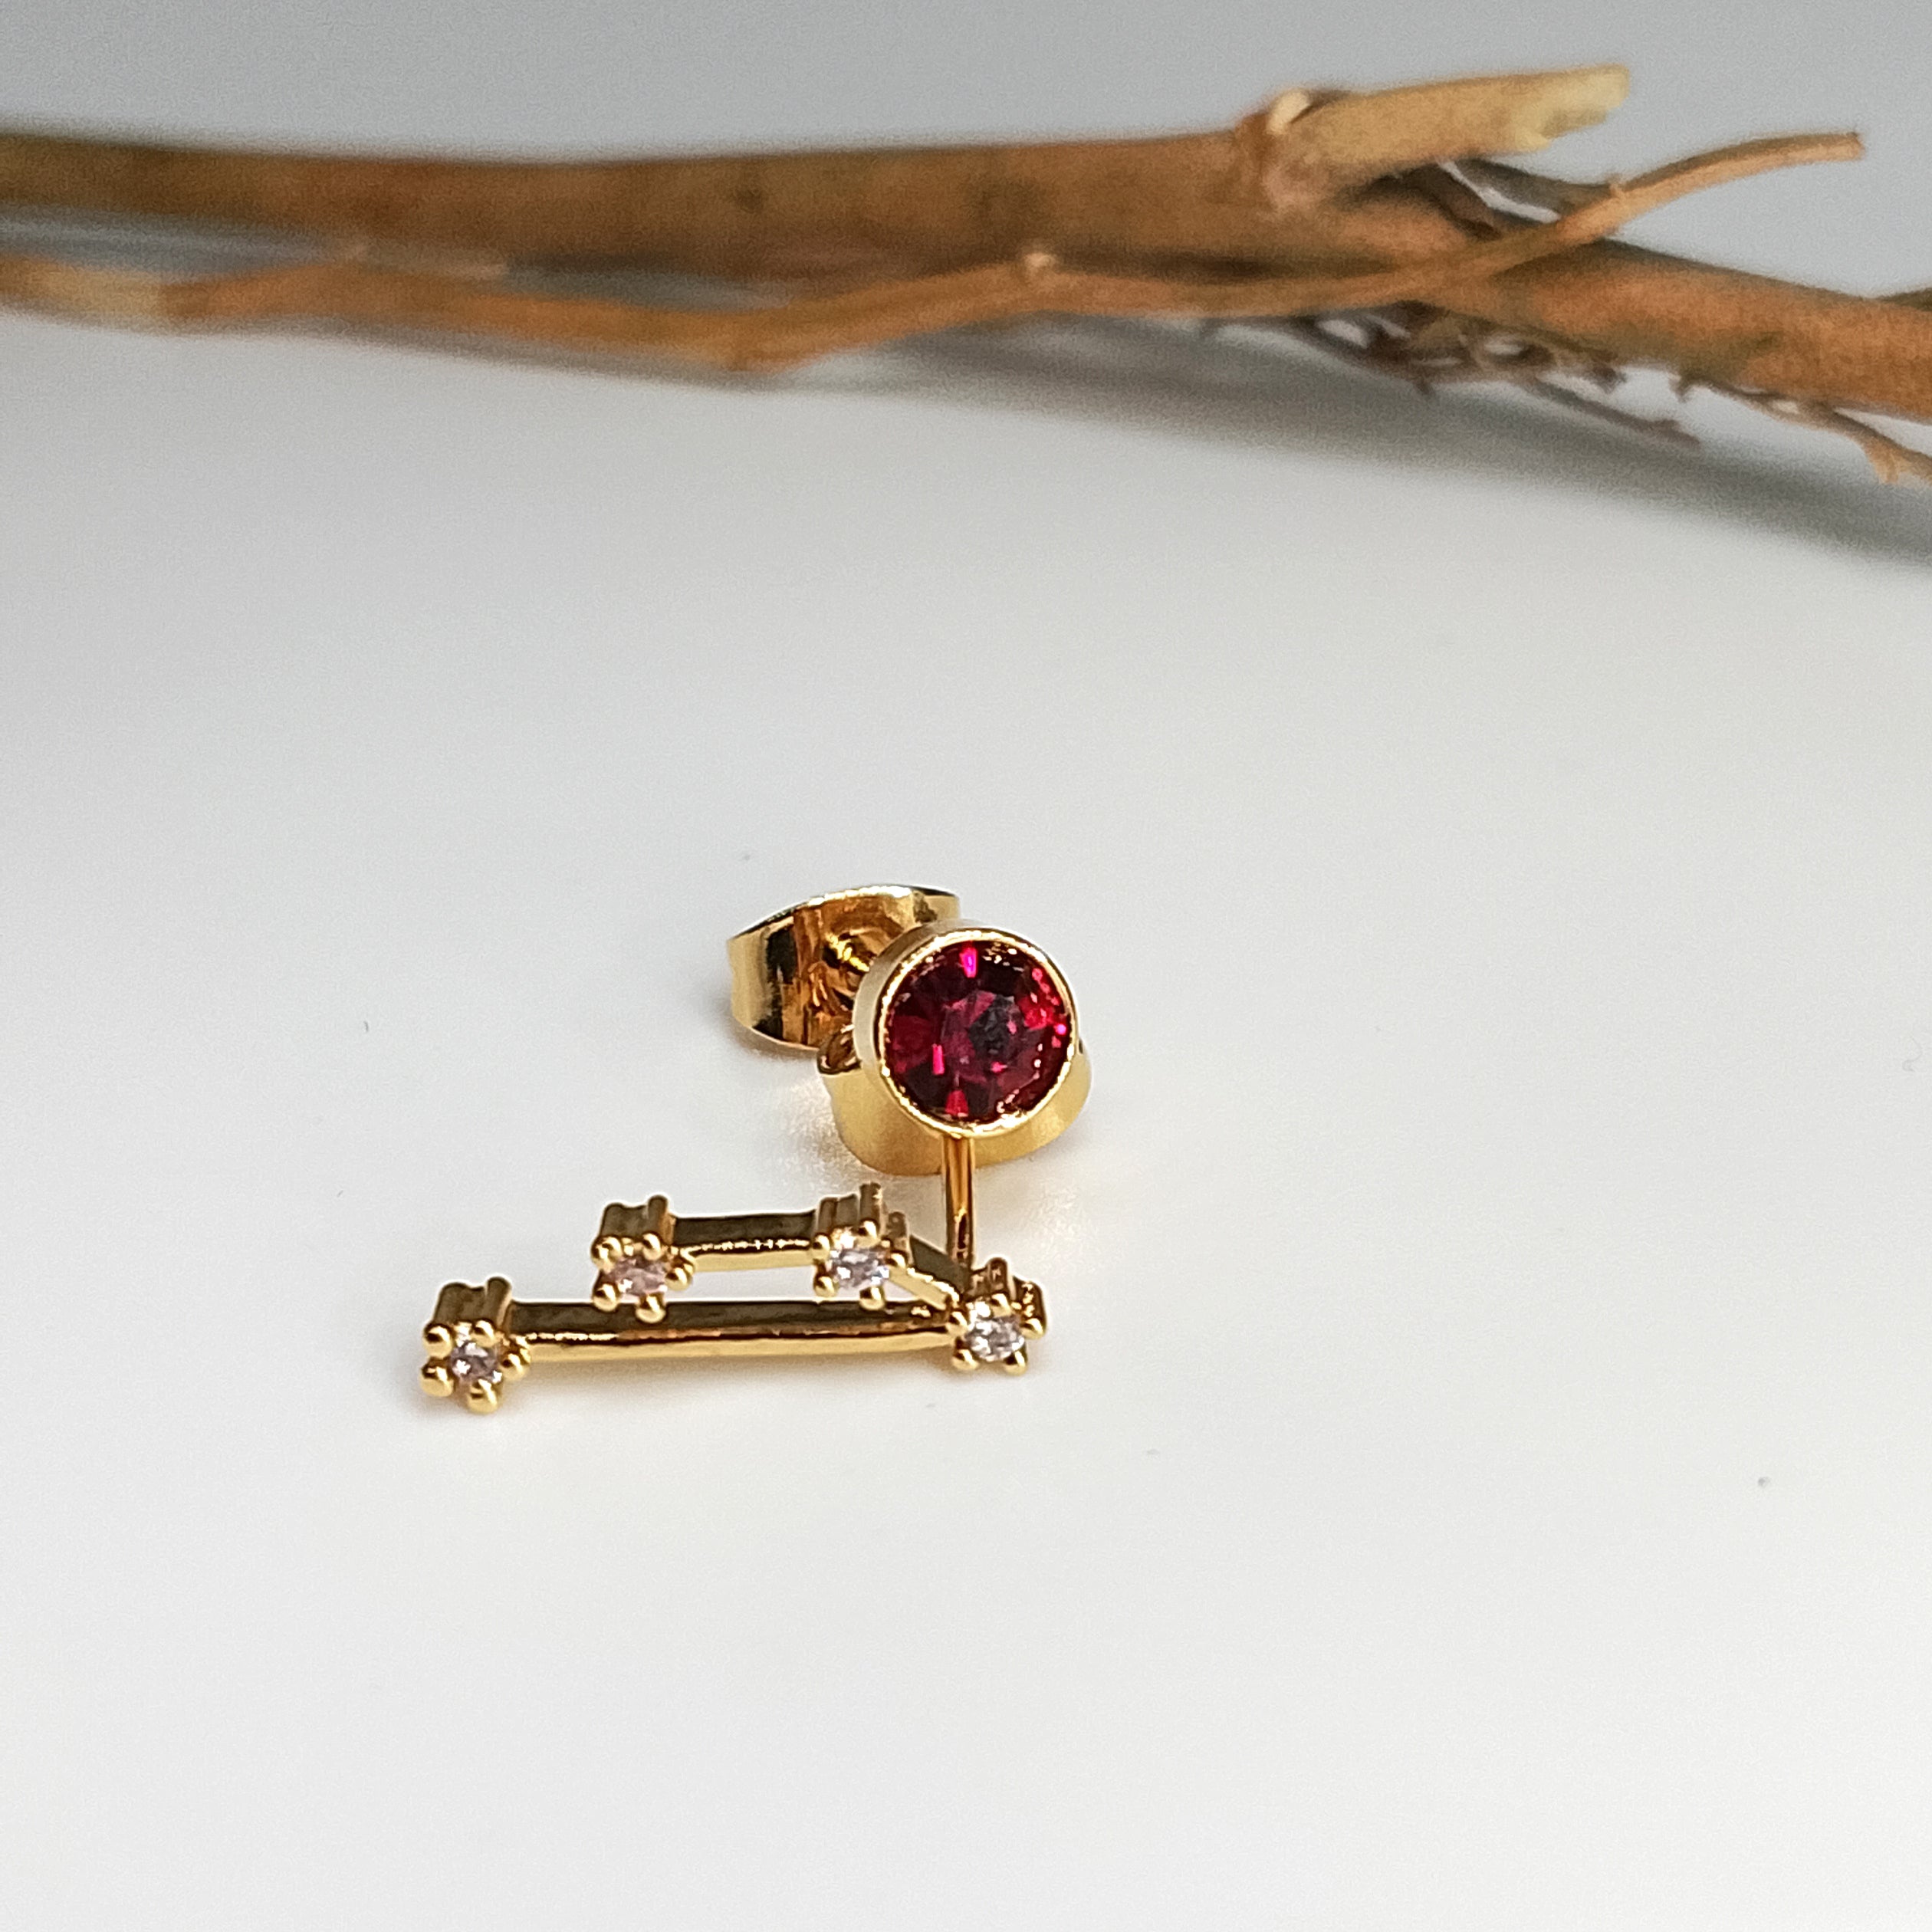 Taurus Constellation Earrings - 24K Gold Plated with Garnet